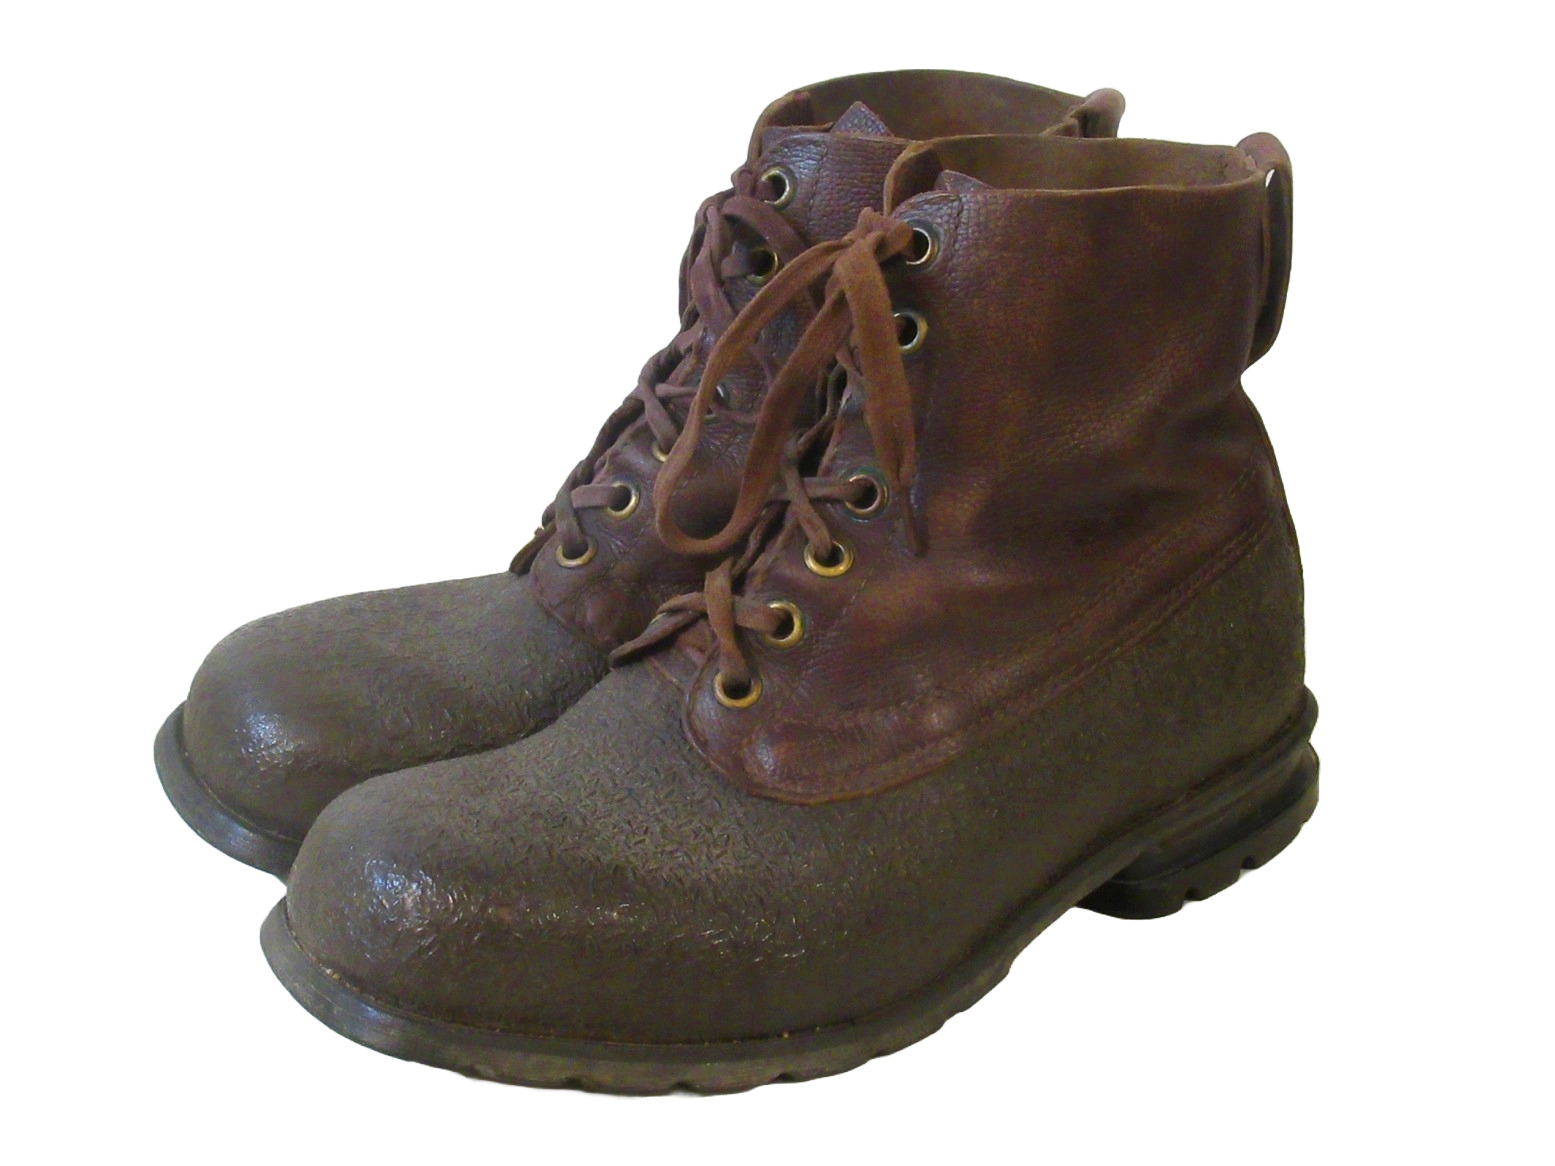 Vintage 1960s Swedish army work boots Brown leather rubber shoes military ankle